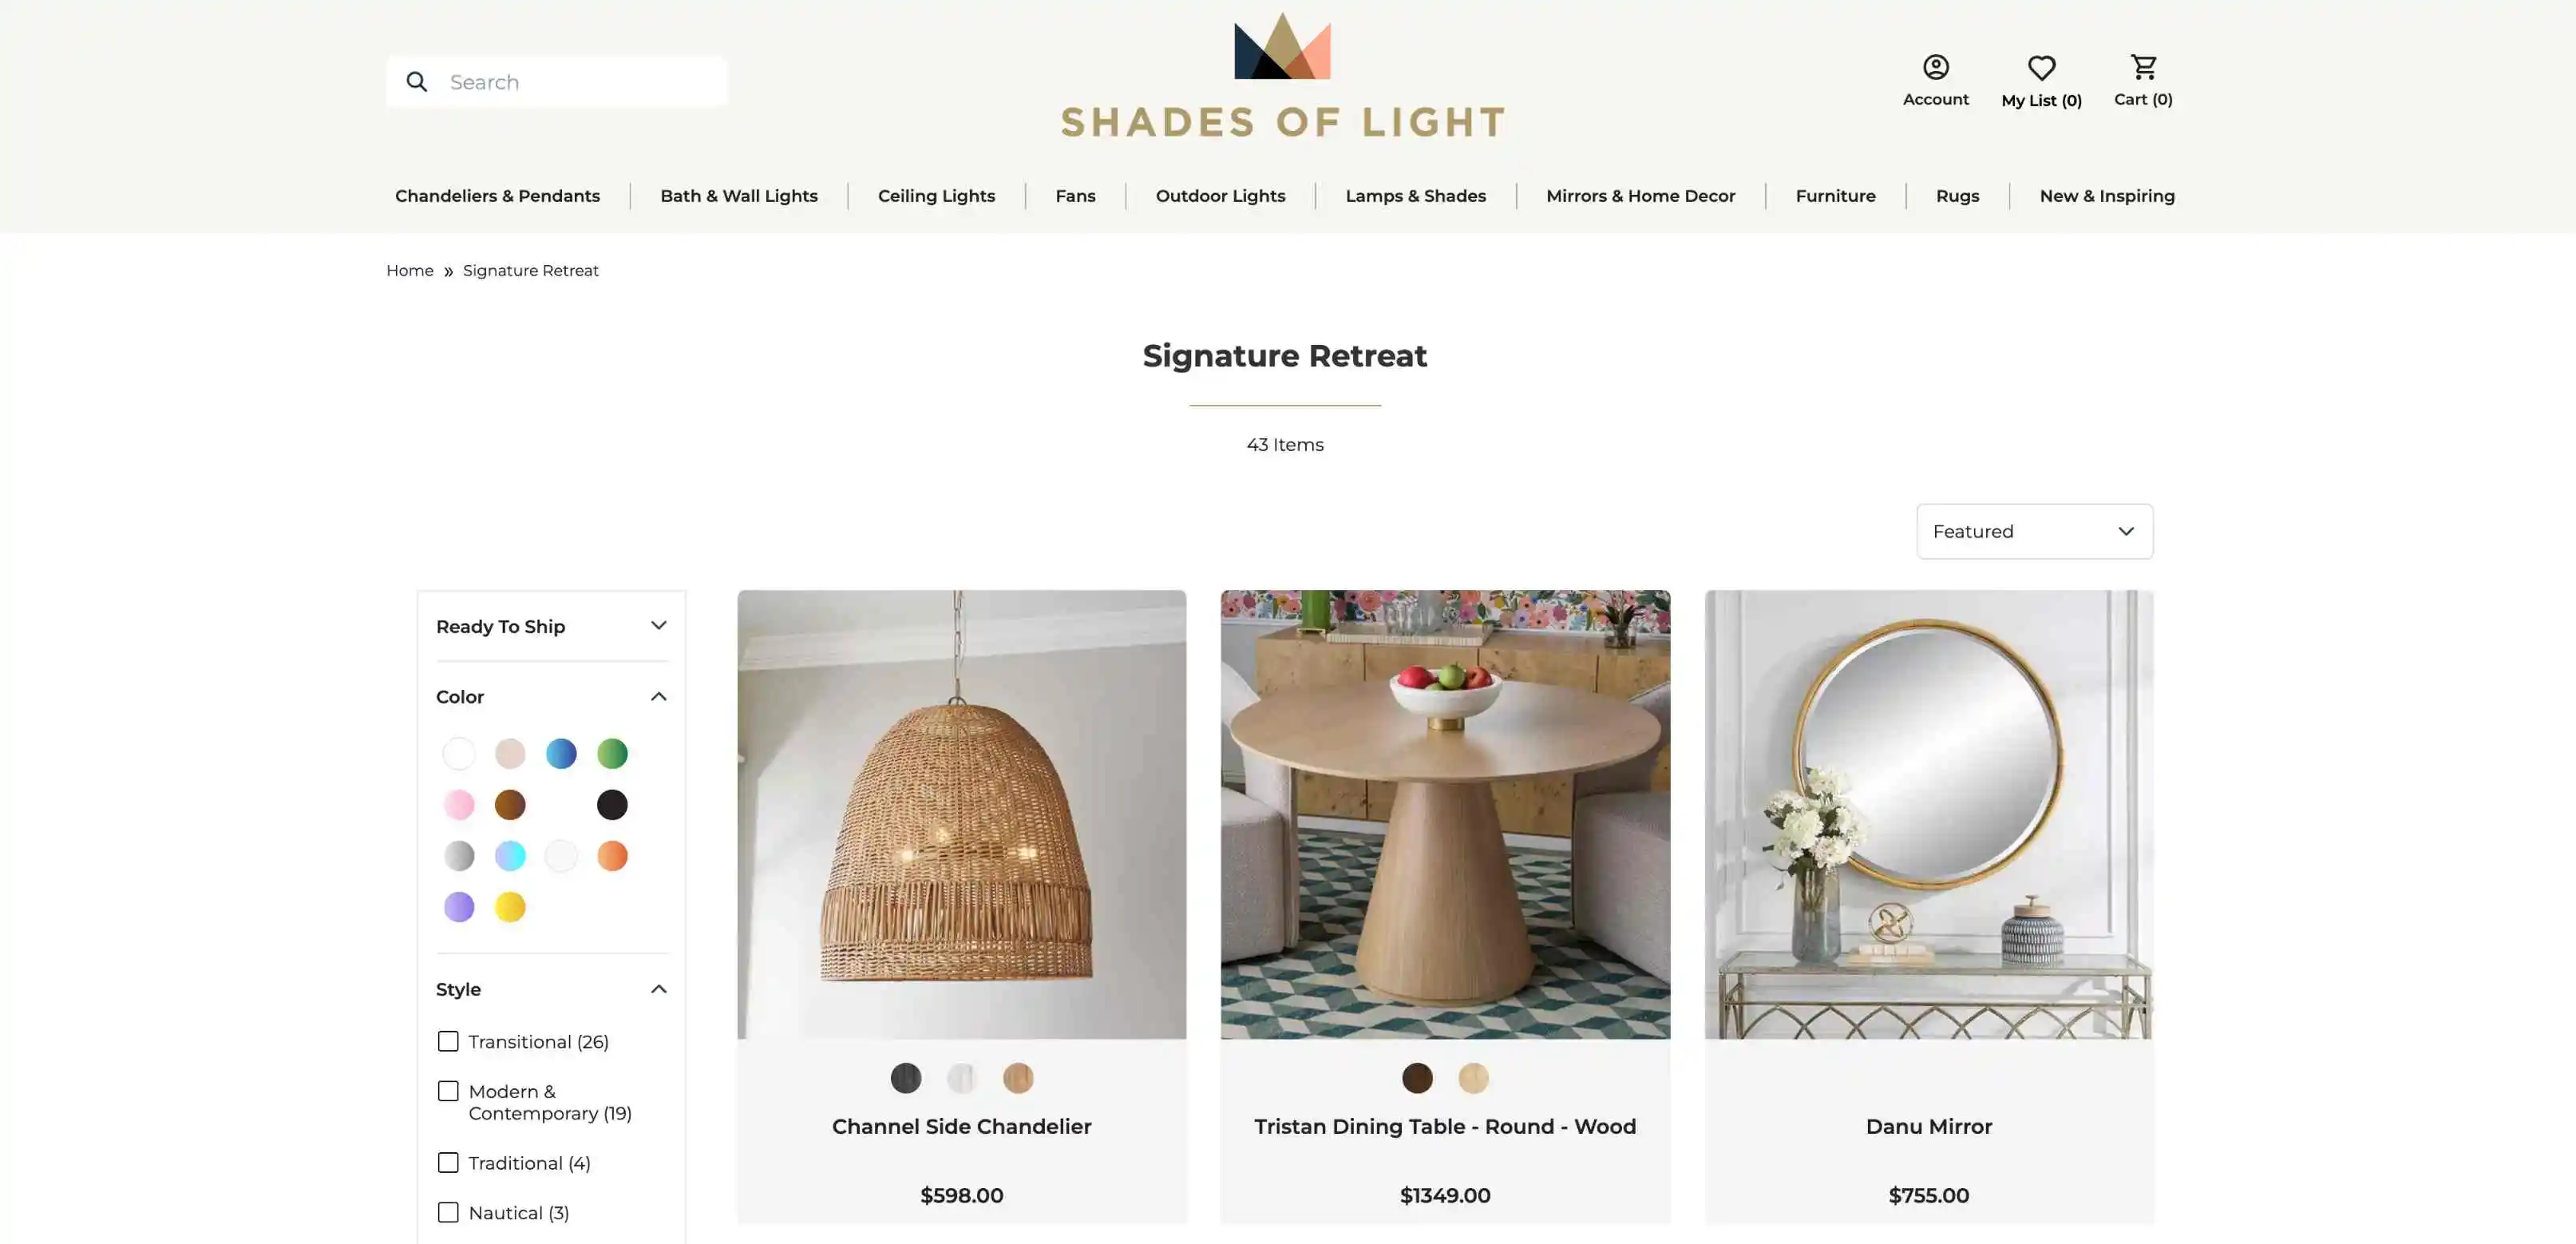 Website homepage for Shades of Light company showcasing various shapes of light fixtures